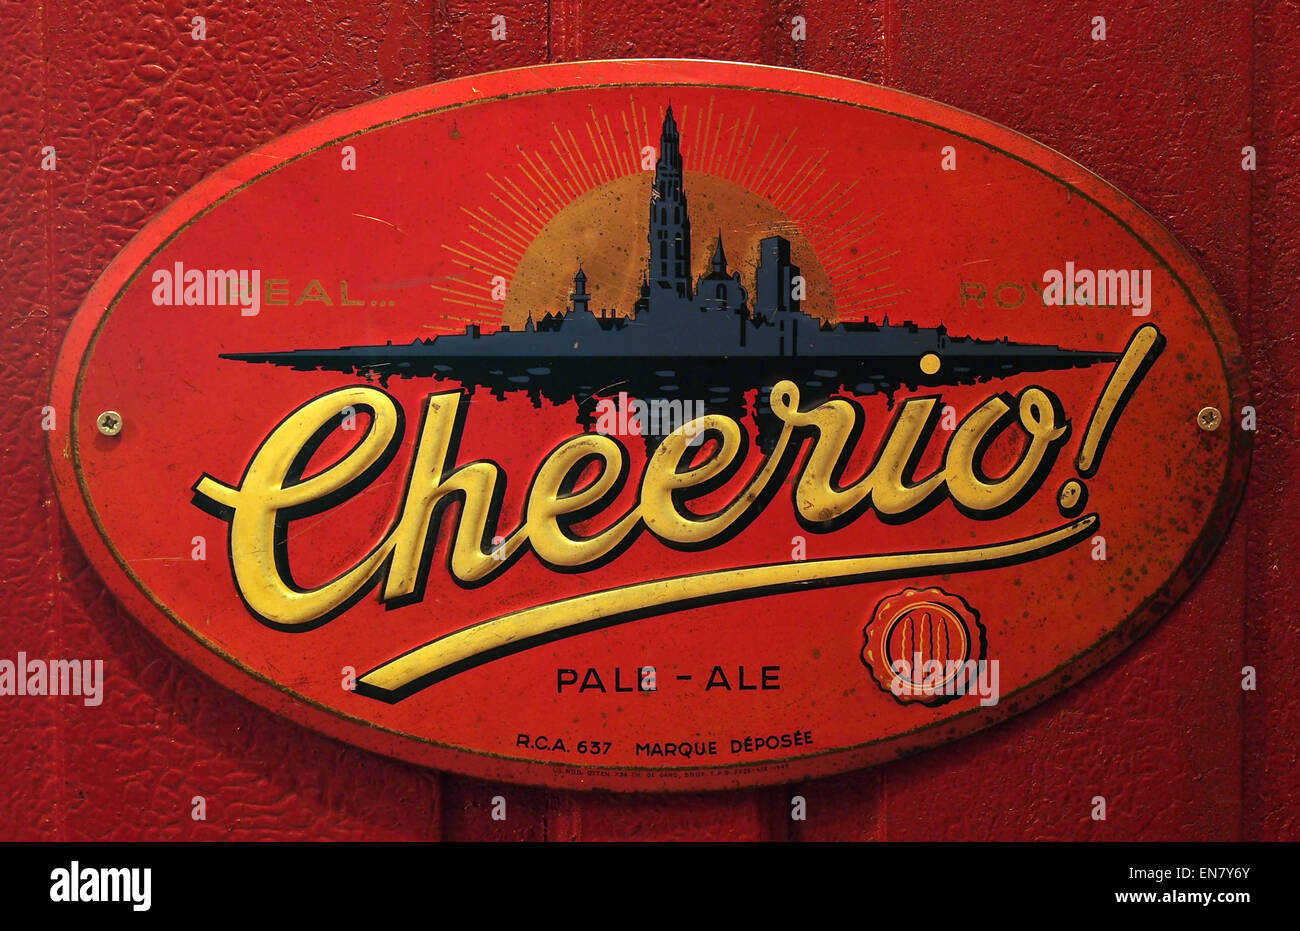 Cheerio Pale-Ale, old metal advertising sign Stock Photo